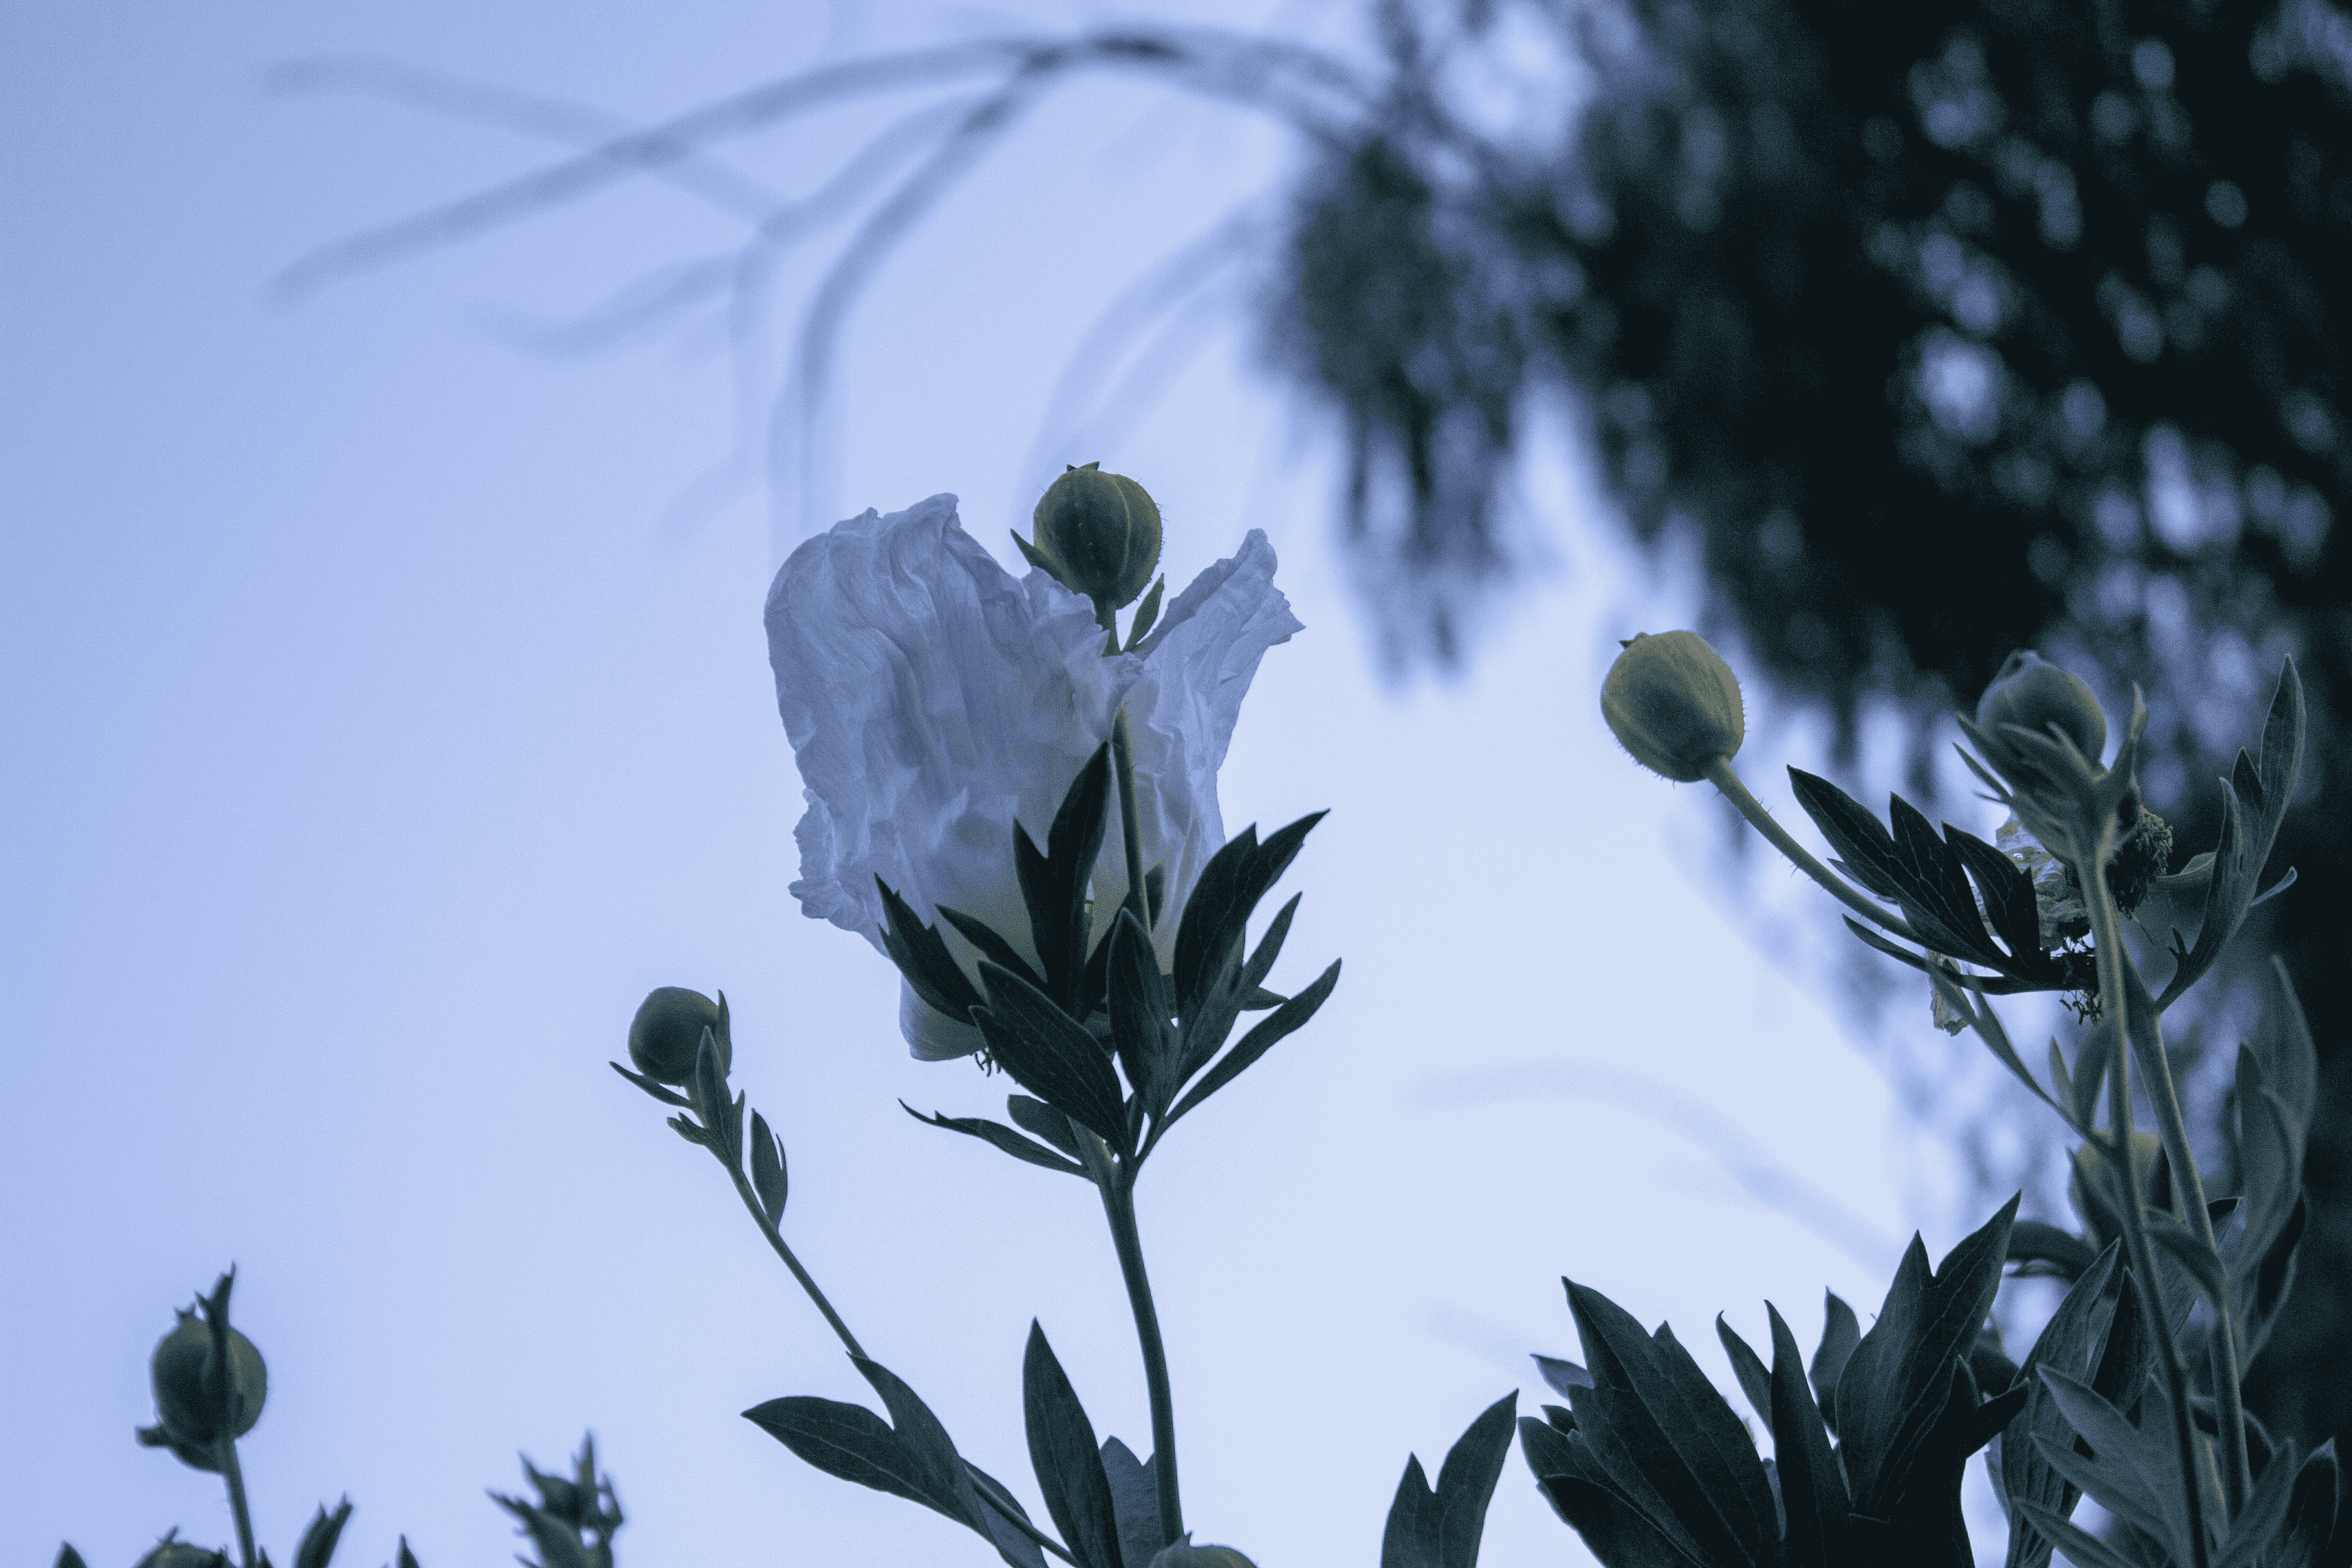 A white flower takes up the center of the photo, with little buds, stems, and leaves growing around it. In the background, you can see a eucalyptus tree and a soft periwinkle sky.